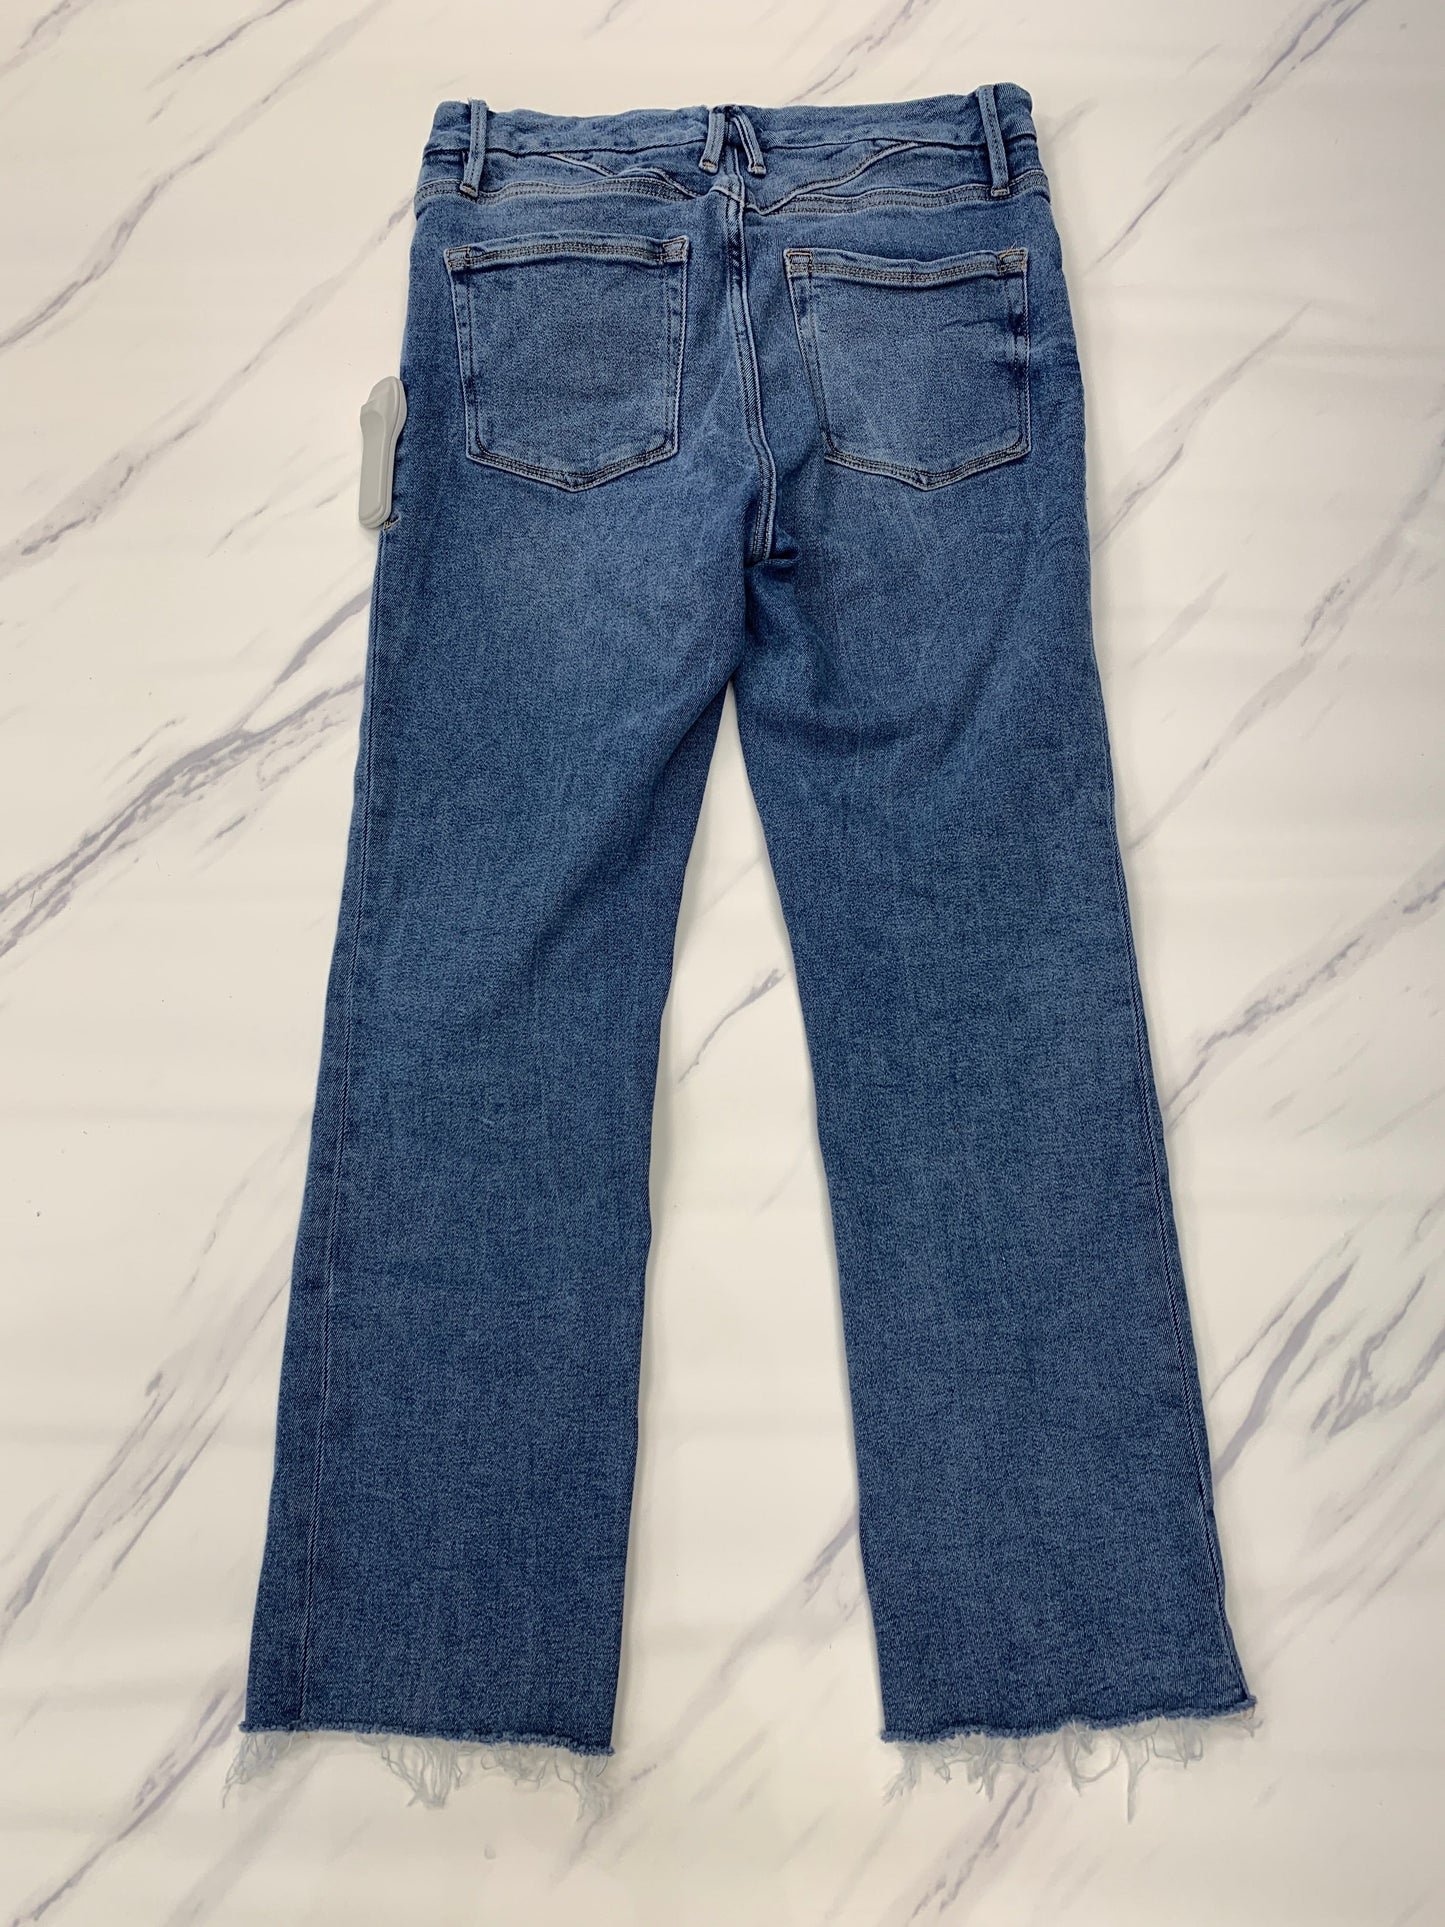 Jeans Cropped Good American, Size 6